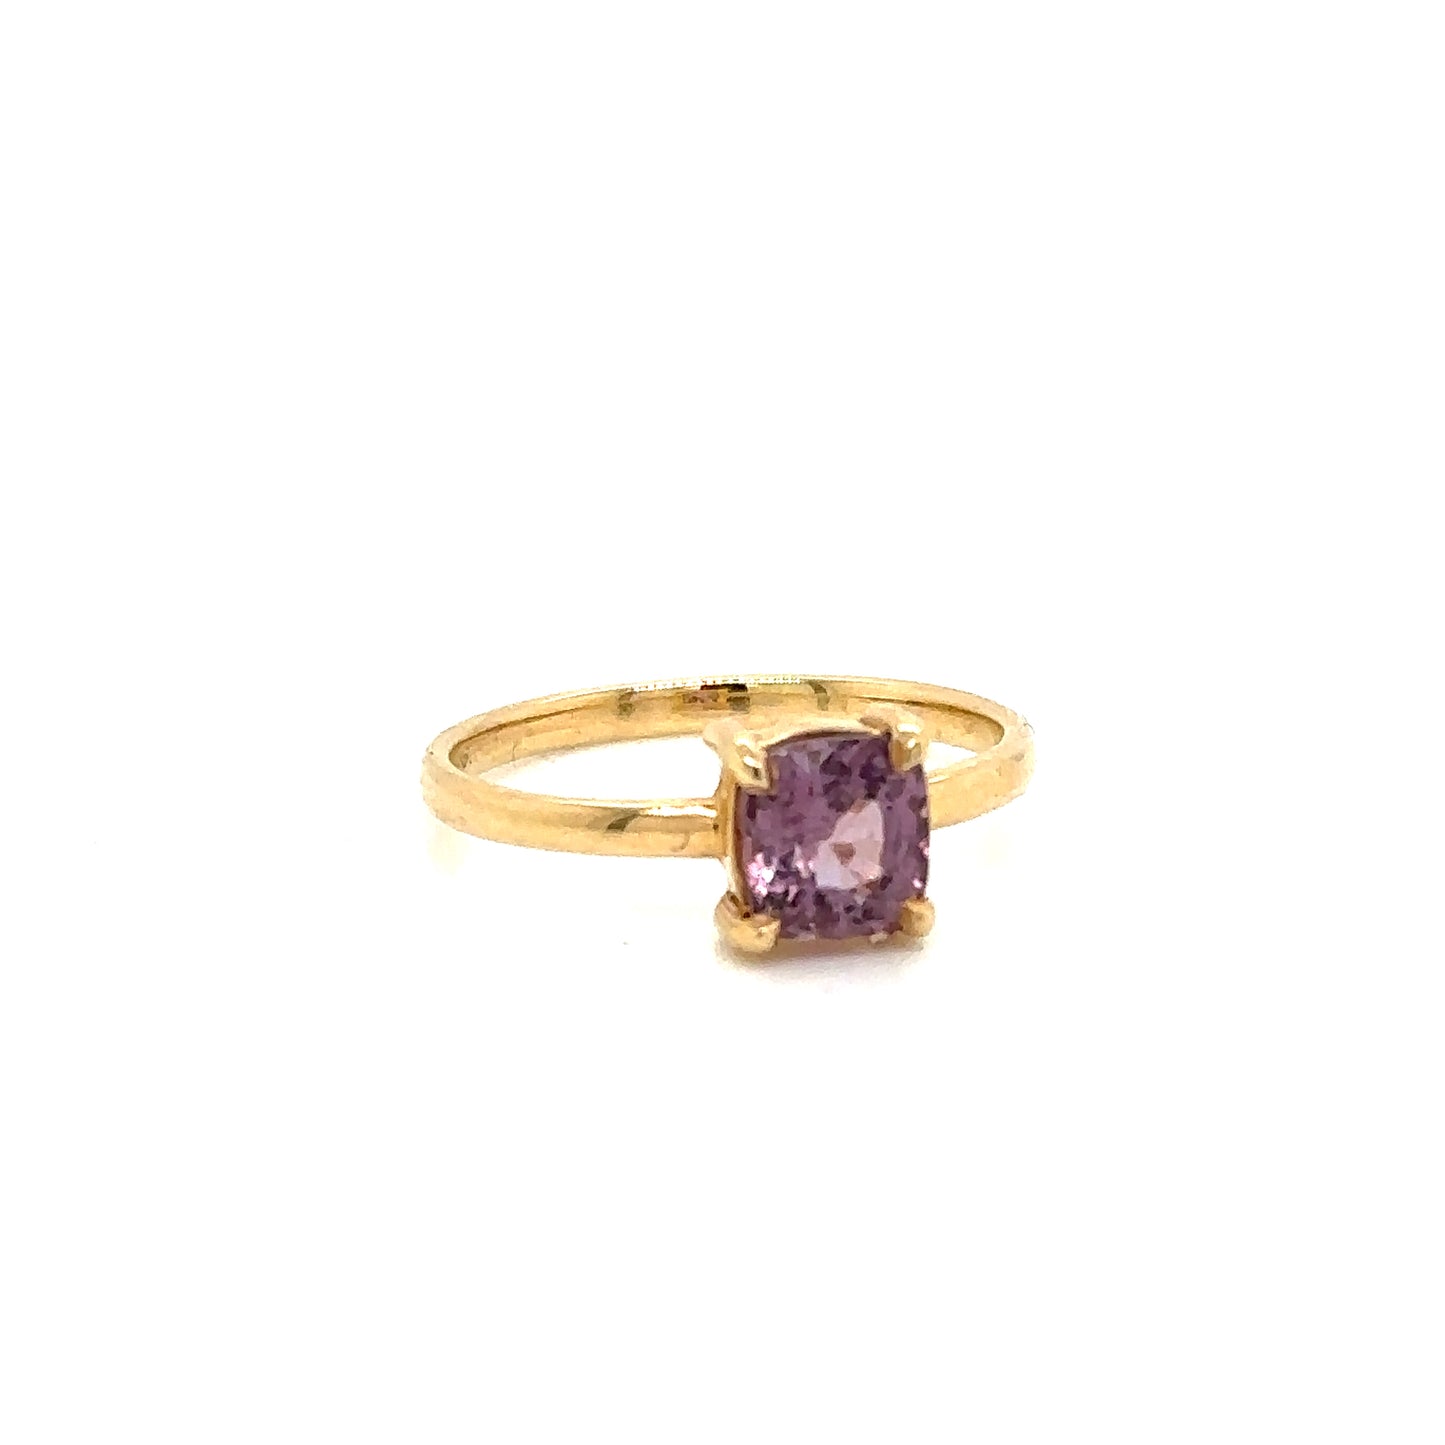 IMMEDIATE DELIVERY / Plum Spinel Solitaire Ring / 14k Yellow Gold / Size 4.75